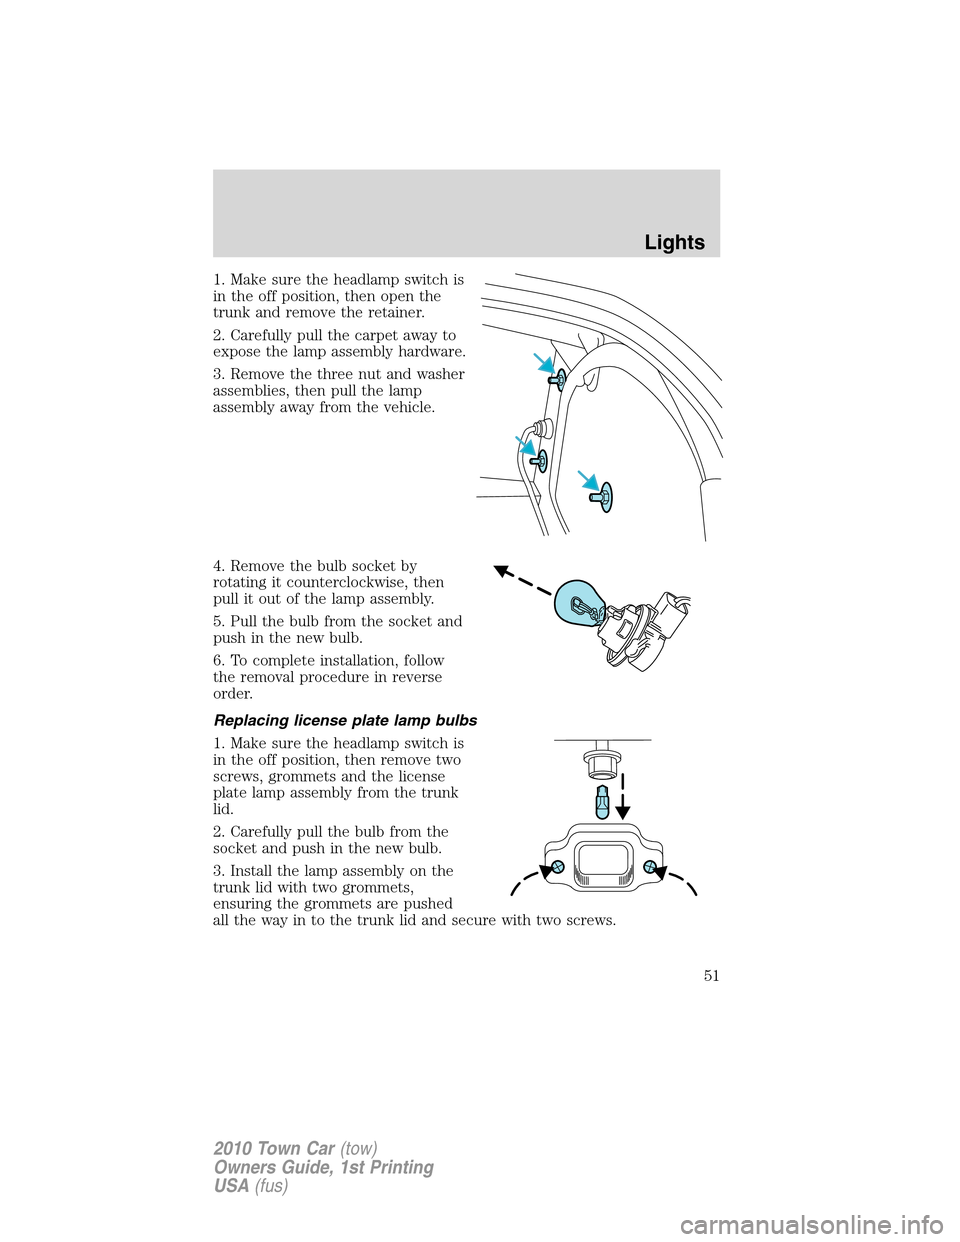 LINCOLN TOWN CAR 2010 Workshop Manual 1. Make sure the headlamp switch is
in the off position, then open the
trunk and remove the retainer.
2. Carefully pull the carpet away to
expose the lamp assembly hardware.
3. Remove the three nut an